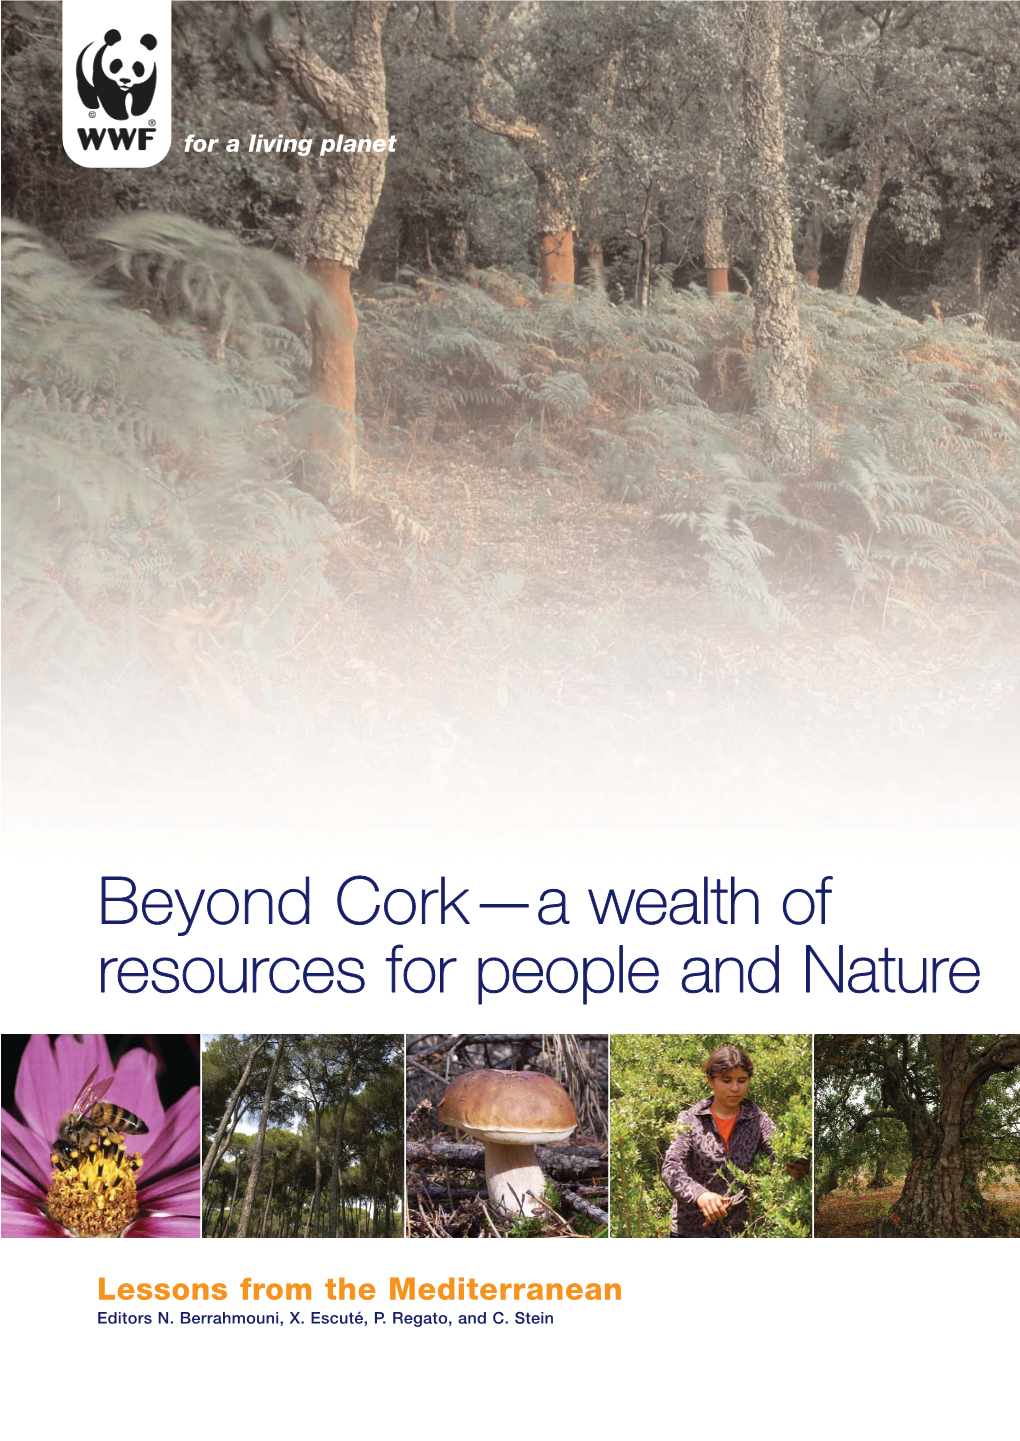 Beyond Cork—A Wealth of Resources for People and Nature